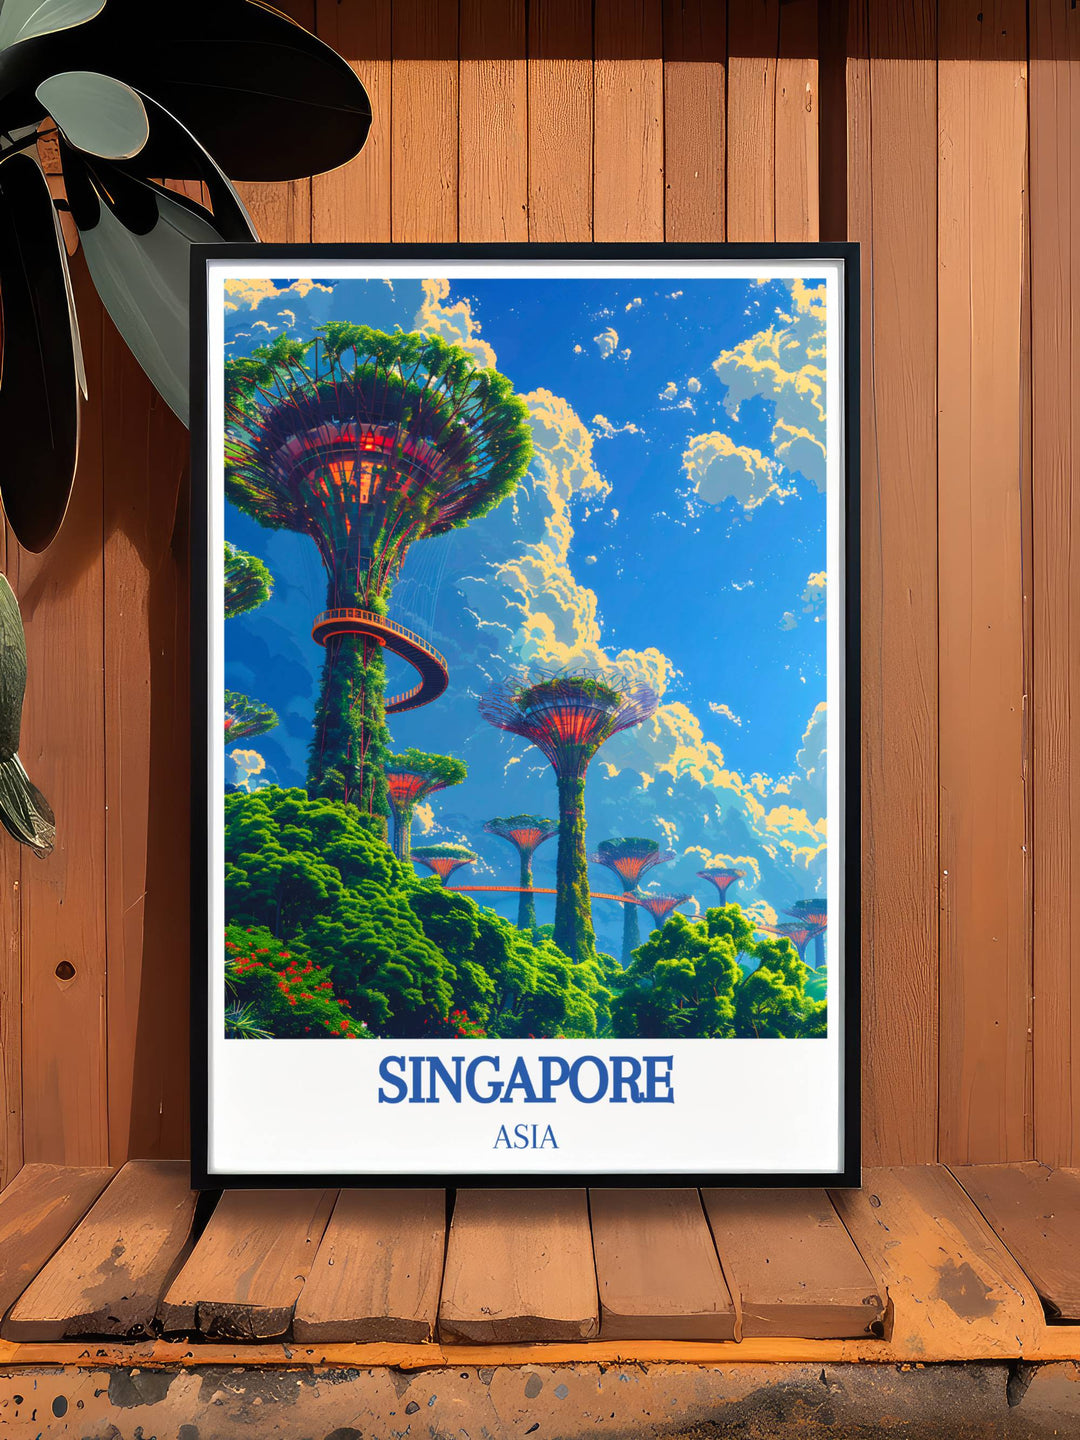 Singapore Fine Art Prints designed to evoke a sense of wonder and appreciation for the innovative beauty of Gardens by the Bay.